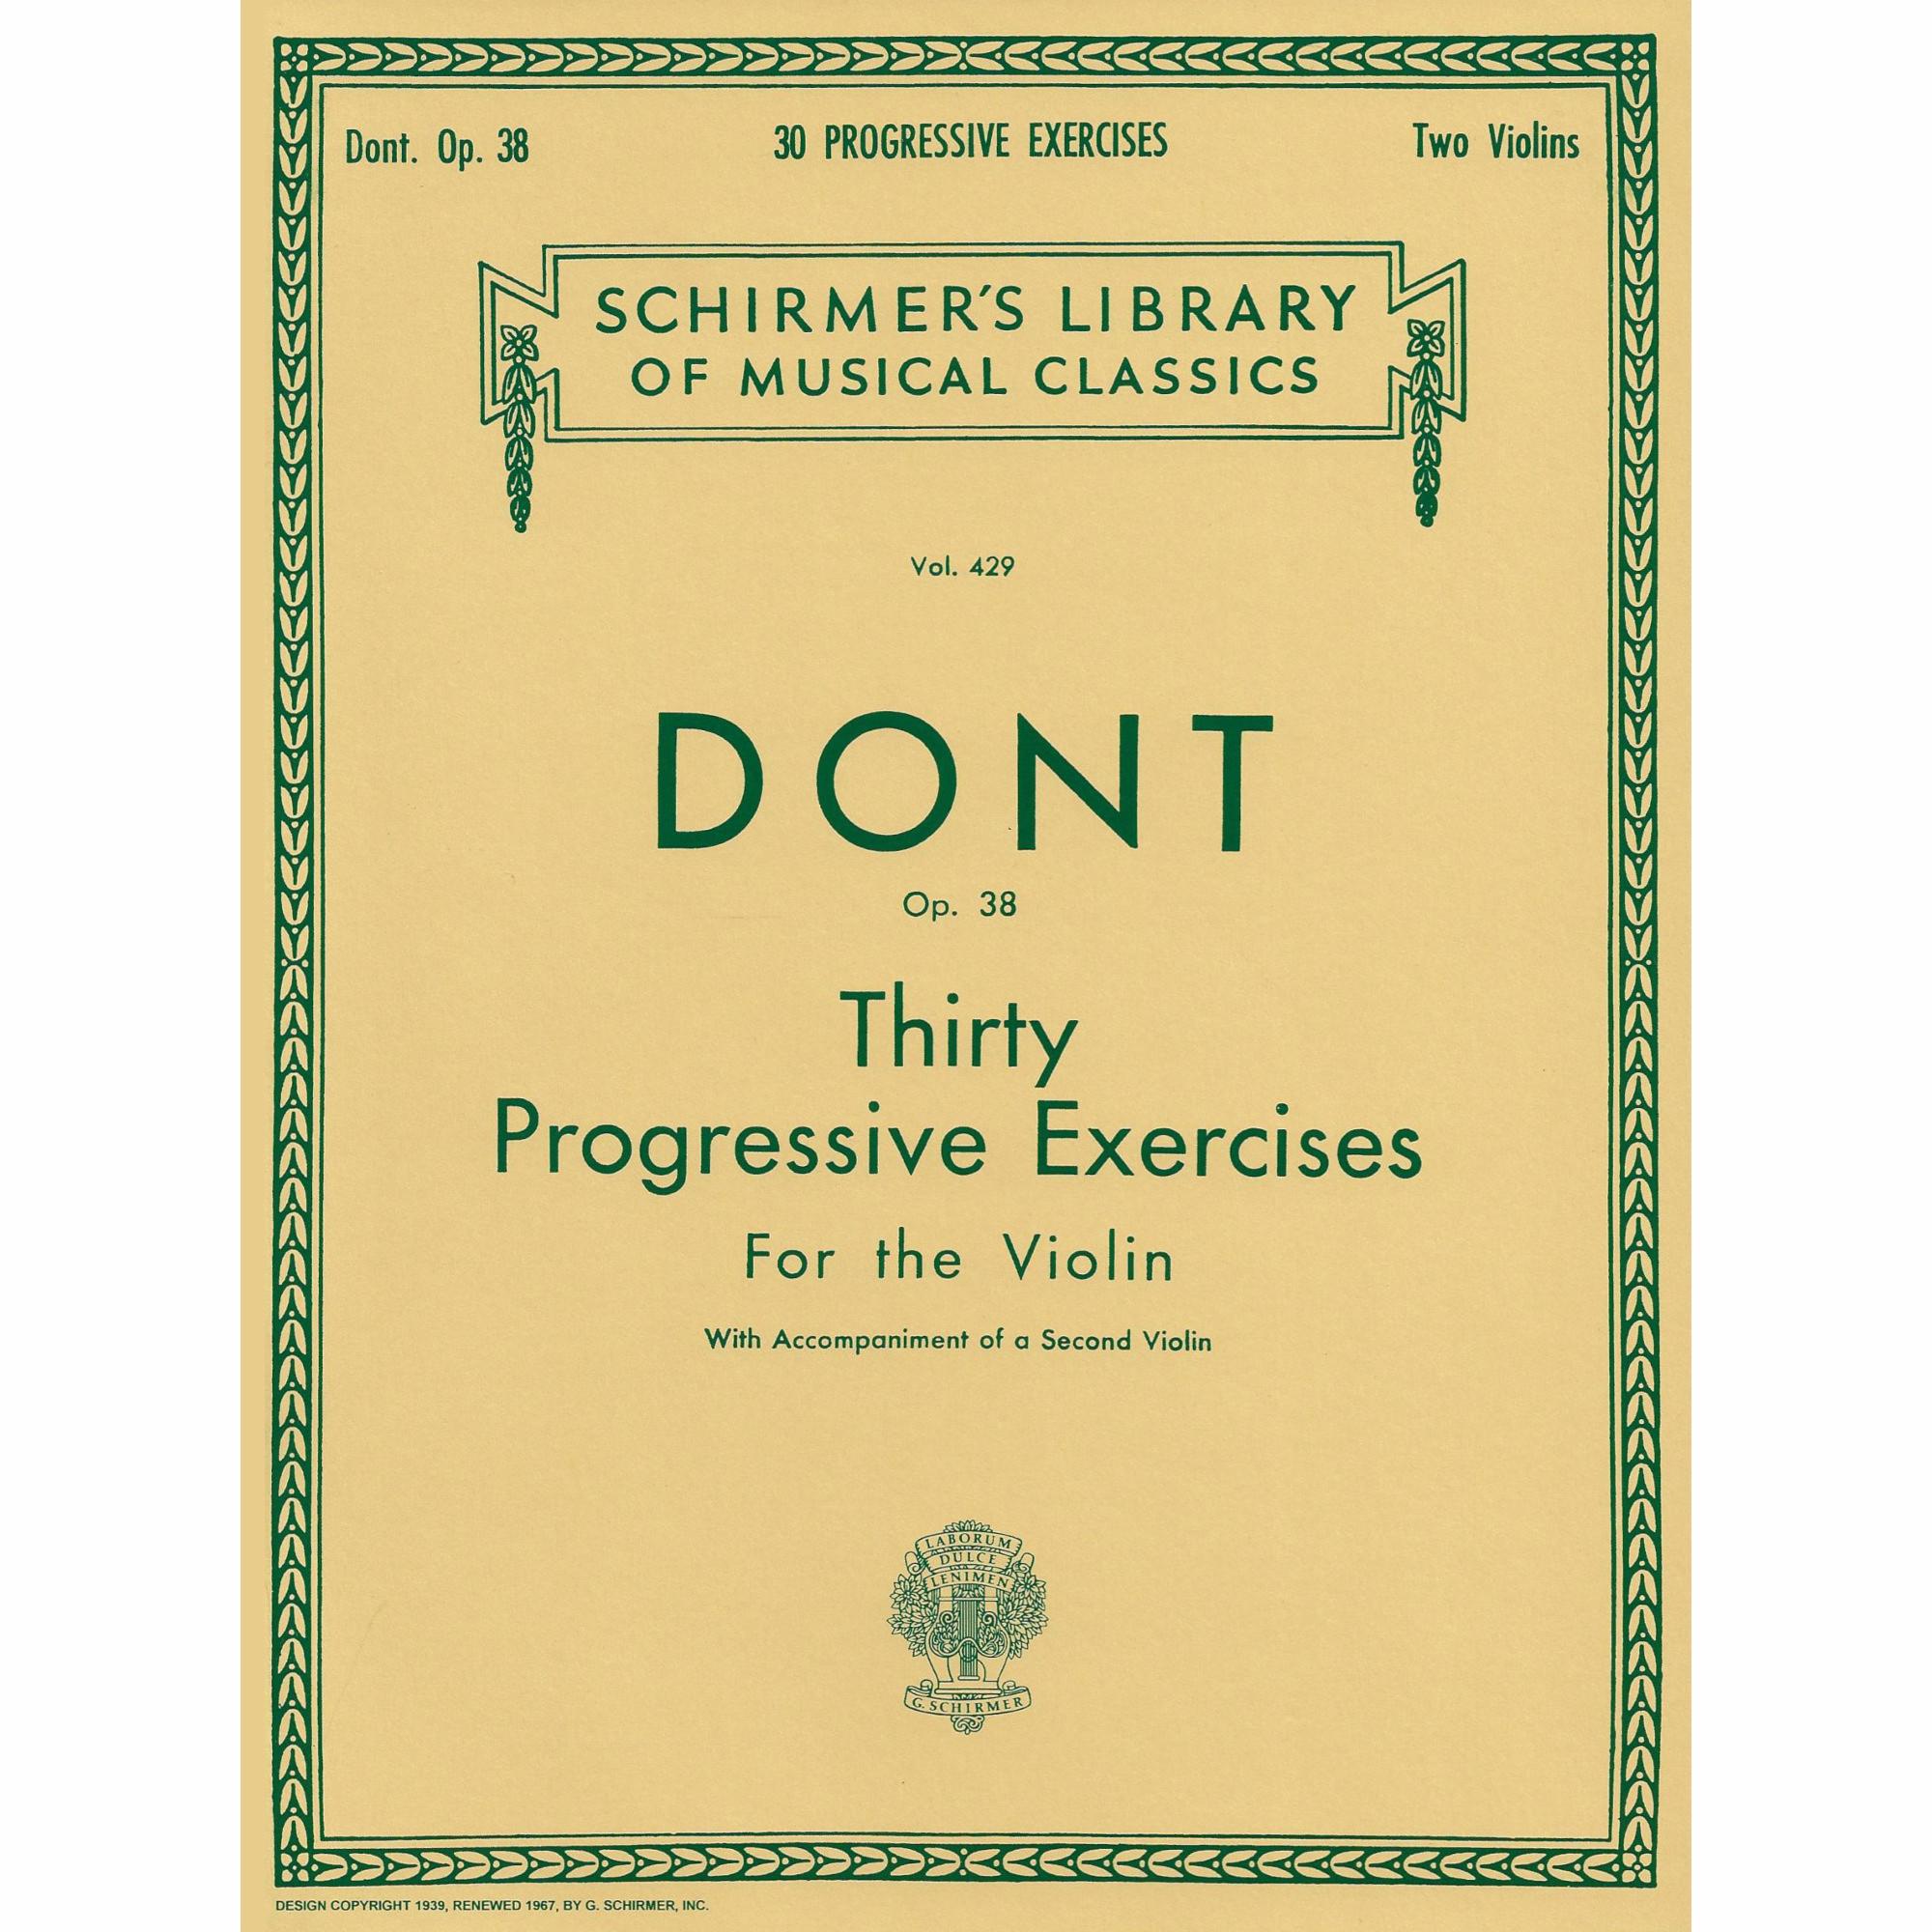 Dont -- Thirty Progressive Exercises, Op. 38 for Two Violins